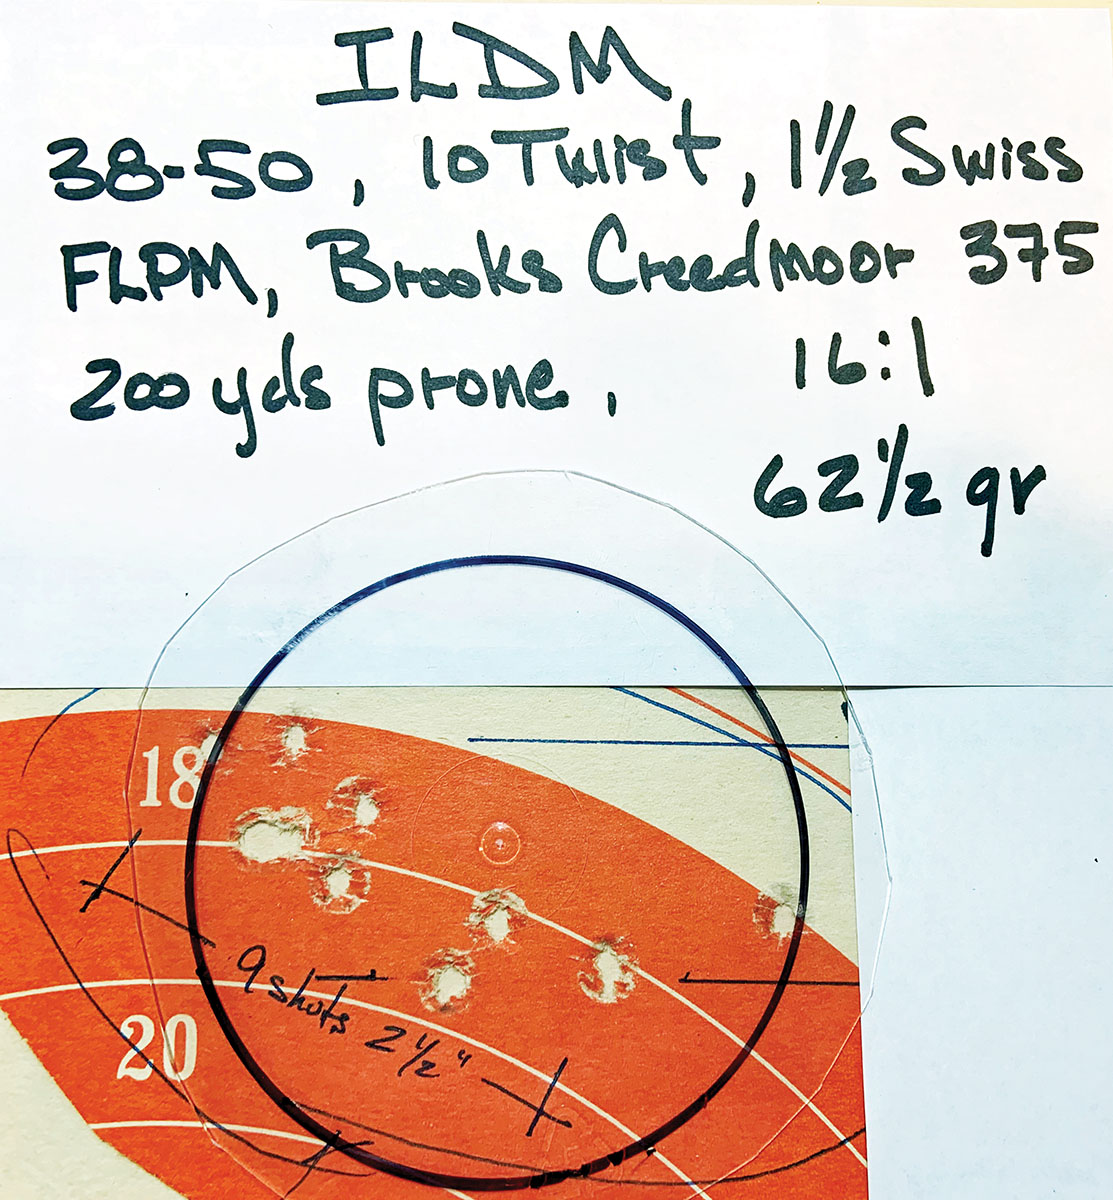 Ten-shot test group, 200 yards with 1.6 MOA circle.